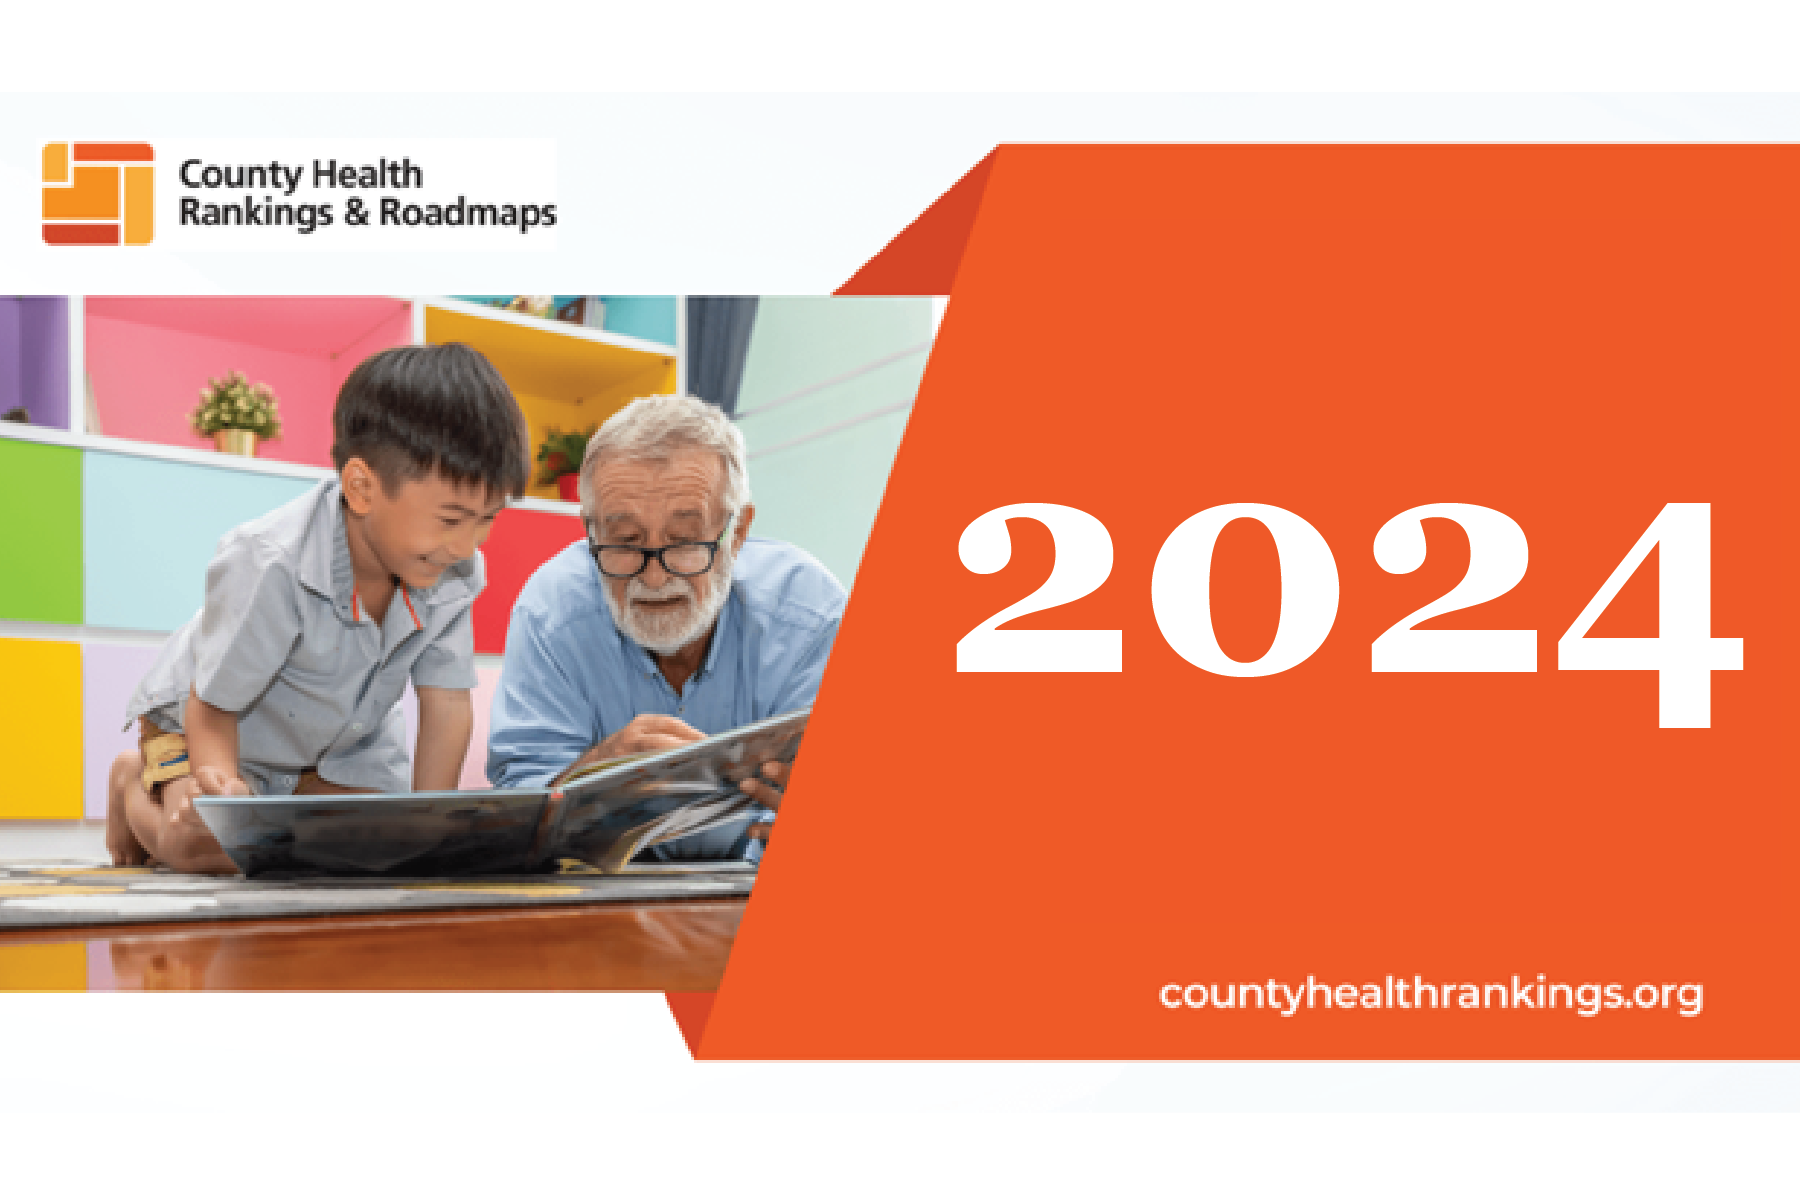 County Profiles in the 2024 County Health Rankings